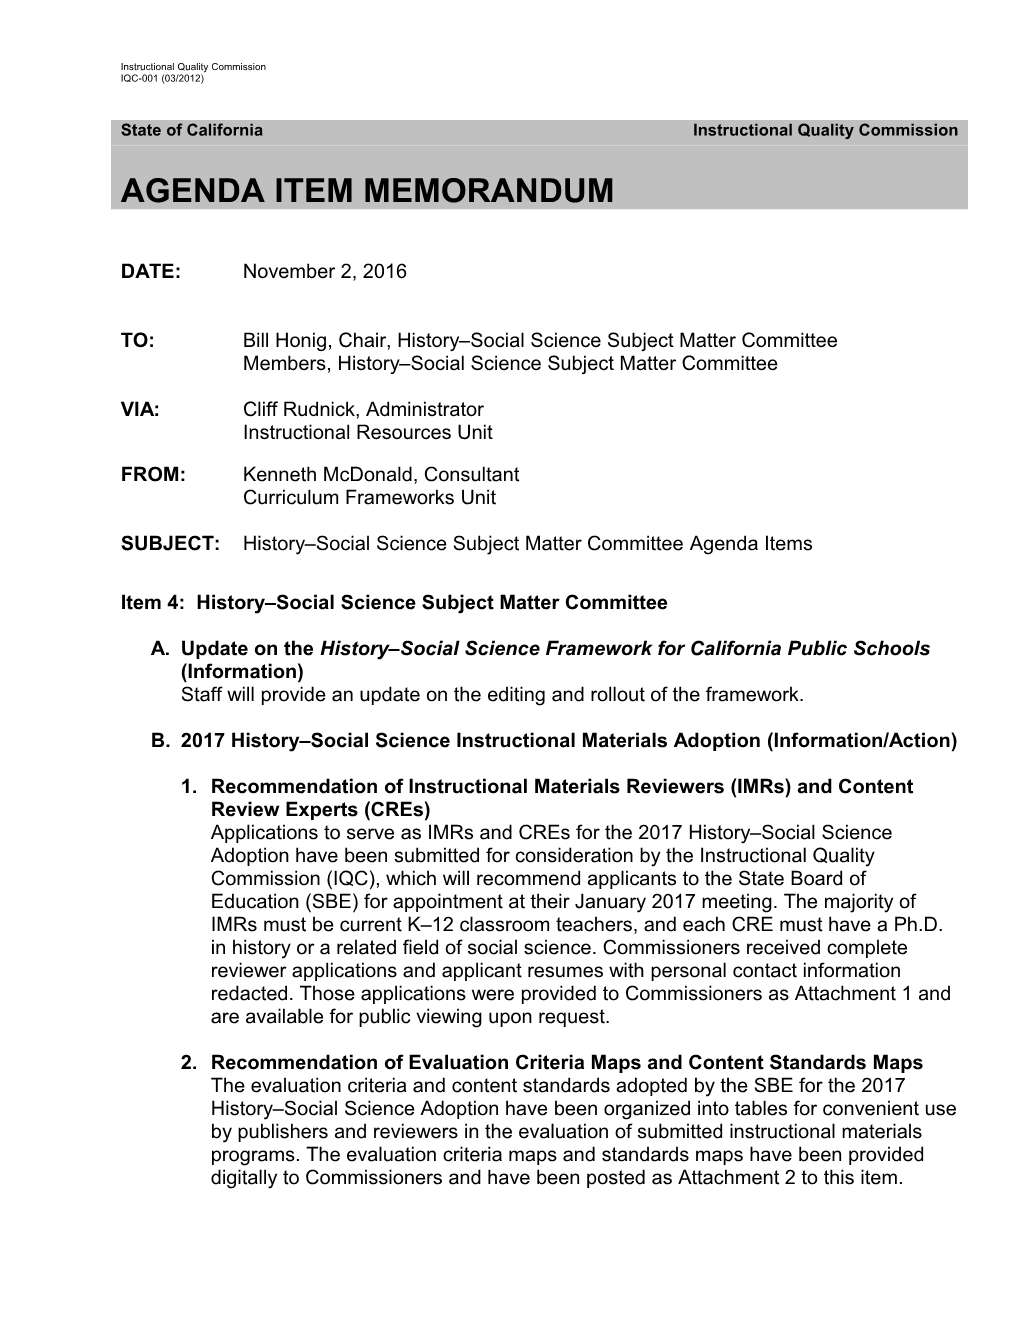 History Social Science Agenda 2016 -Instructional Quality Commission (CA Dept of Education)